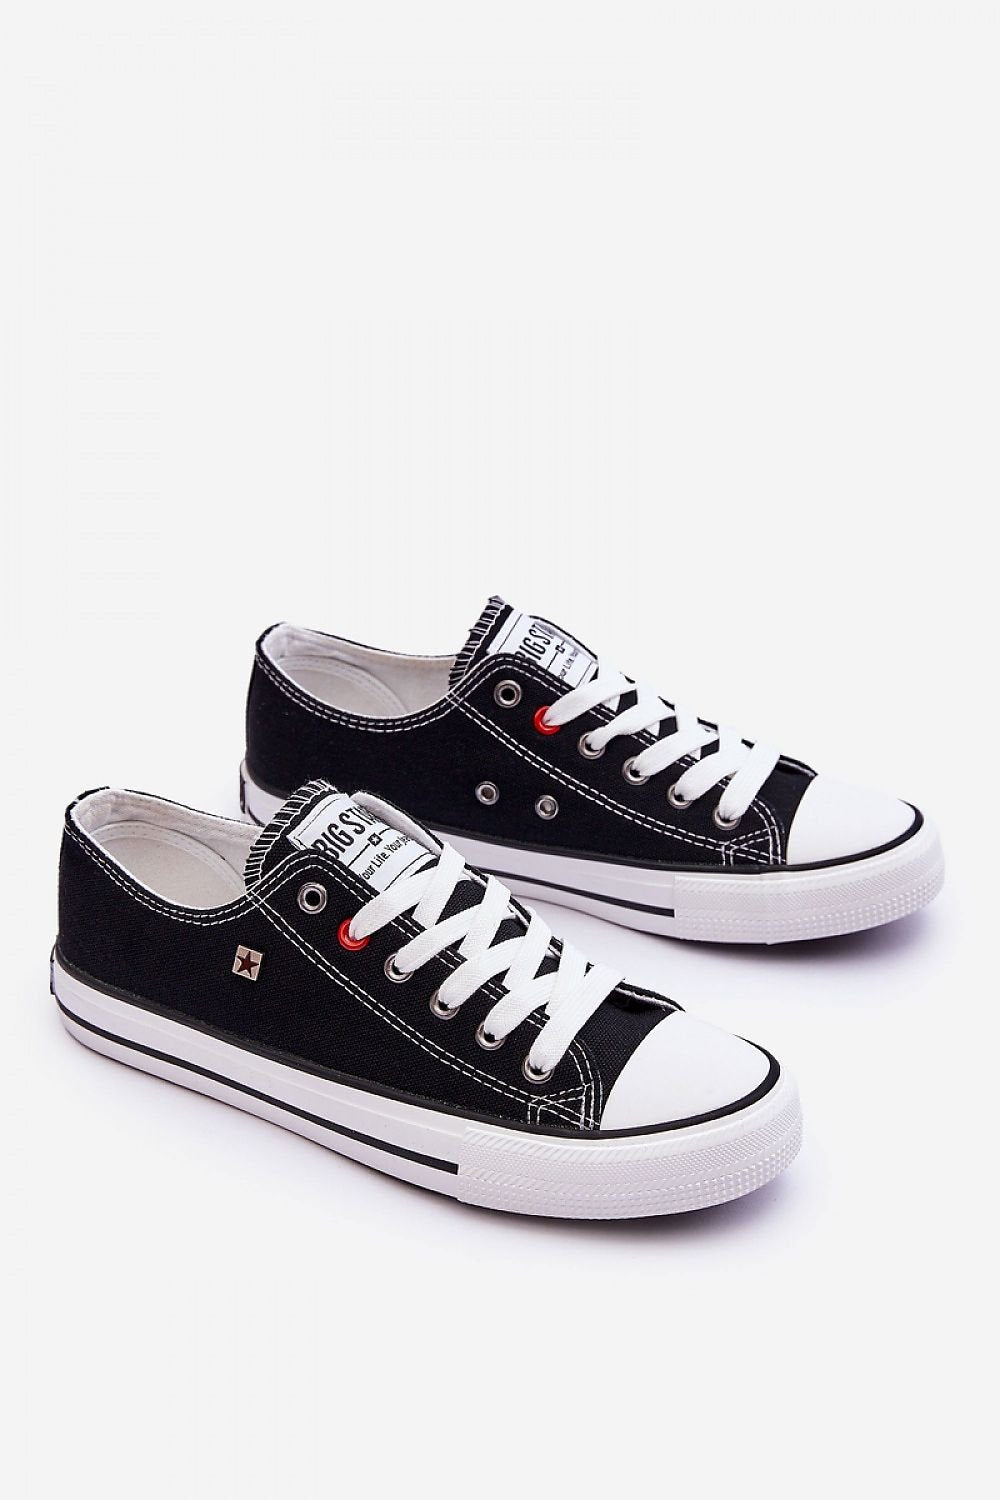 Classic White-Black Step in style Sneakers